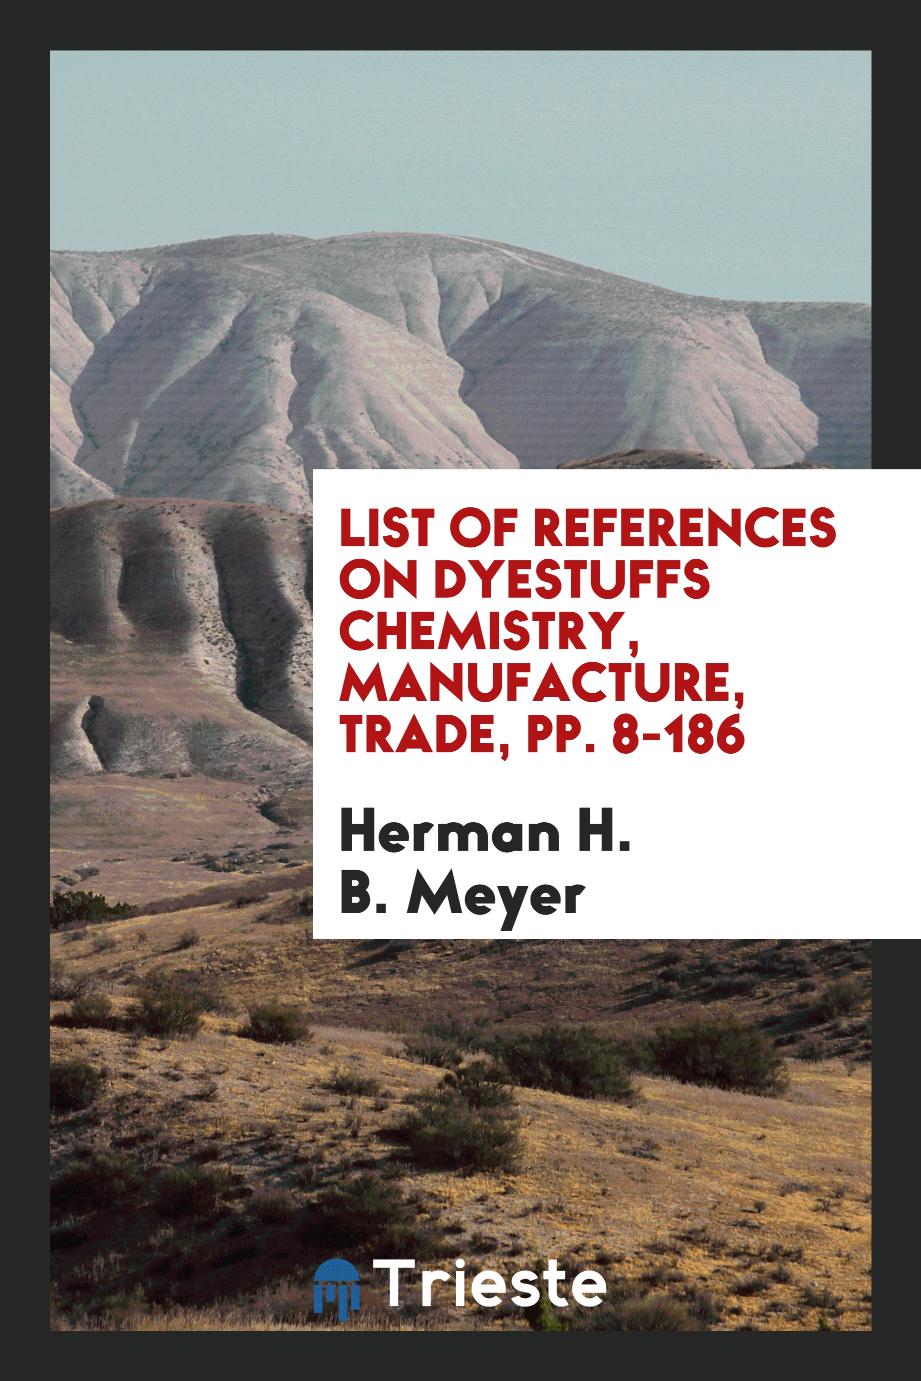 List of References on Dyestuffs Chemistry, Manufacture, Trade, pp. 8-186